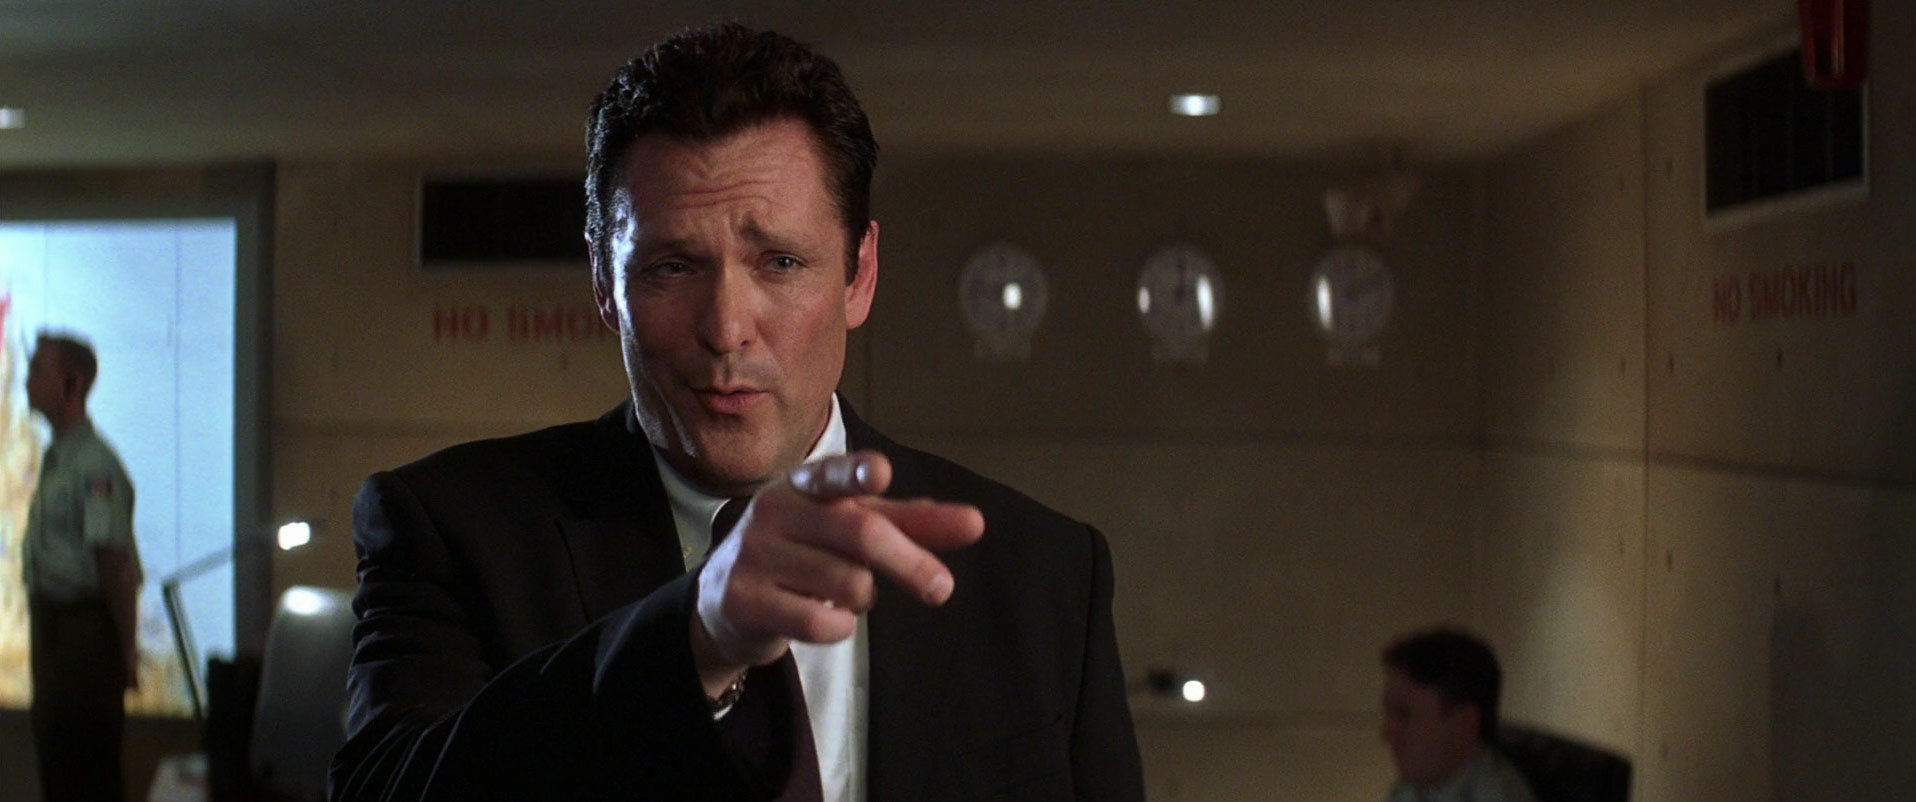 Happy 63rd birthday Michael Madsen! Look at you, you\d think you were some kind of a hero... 